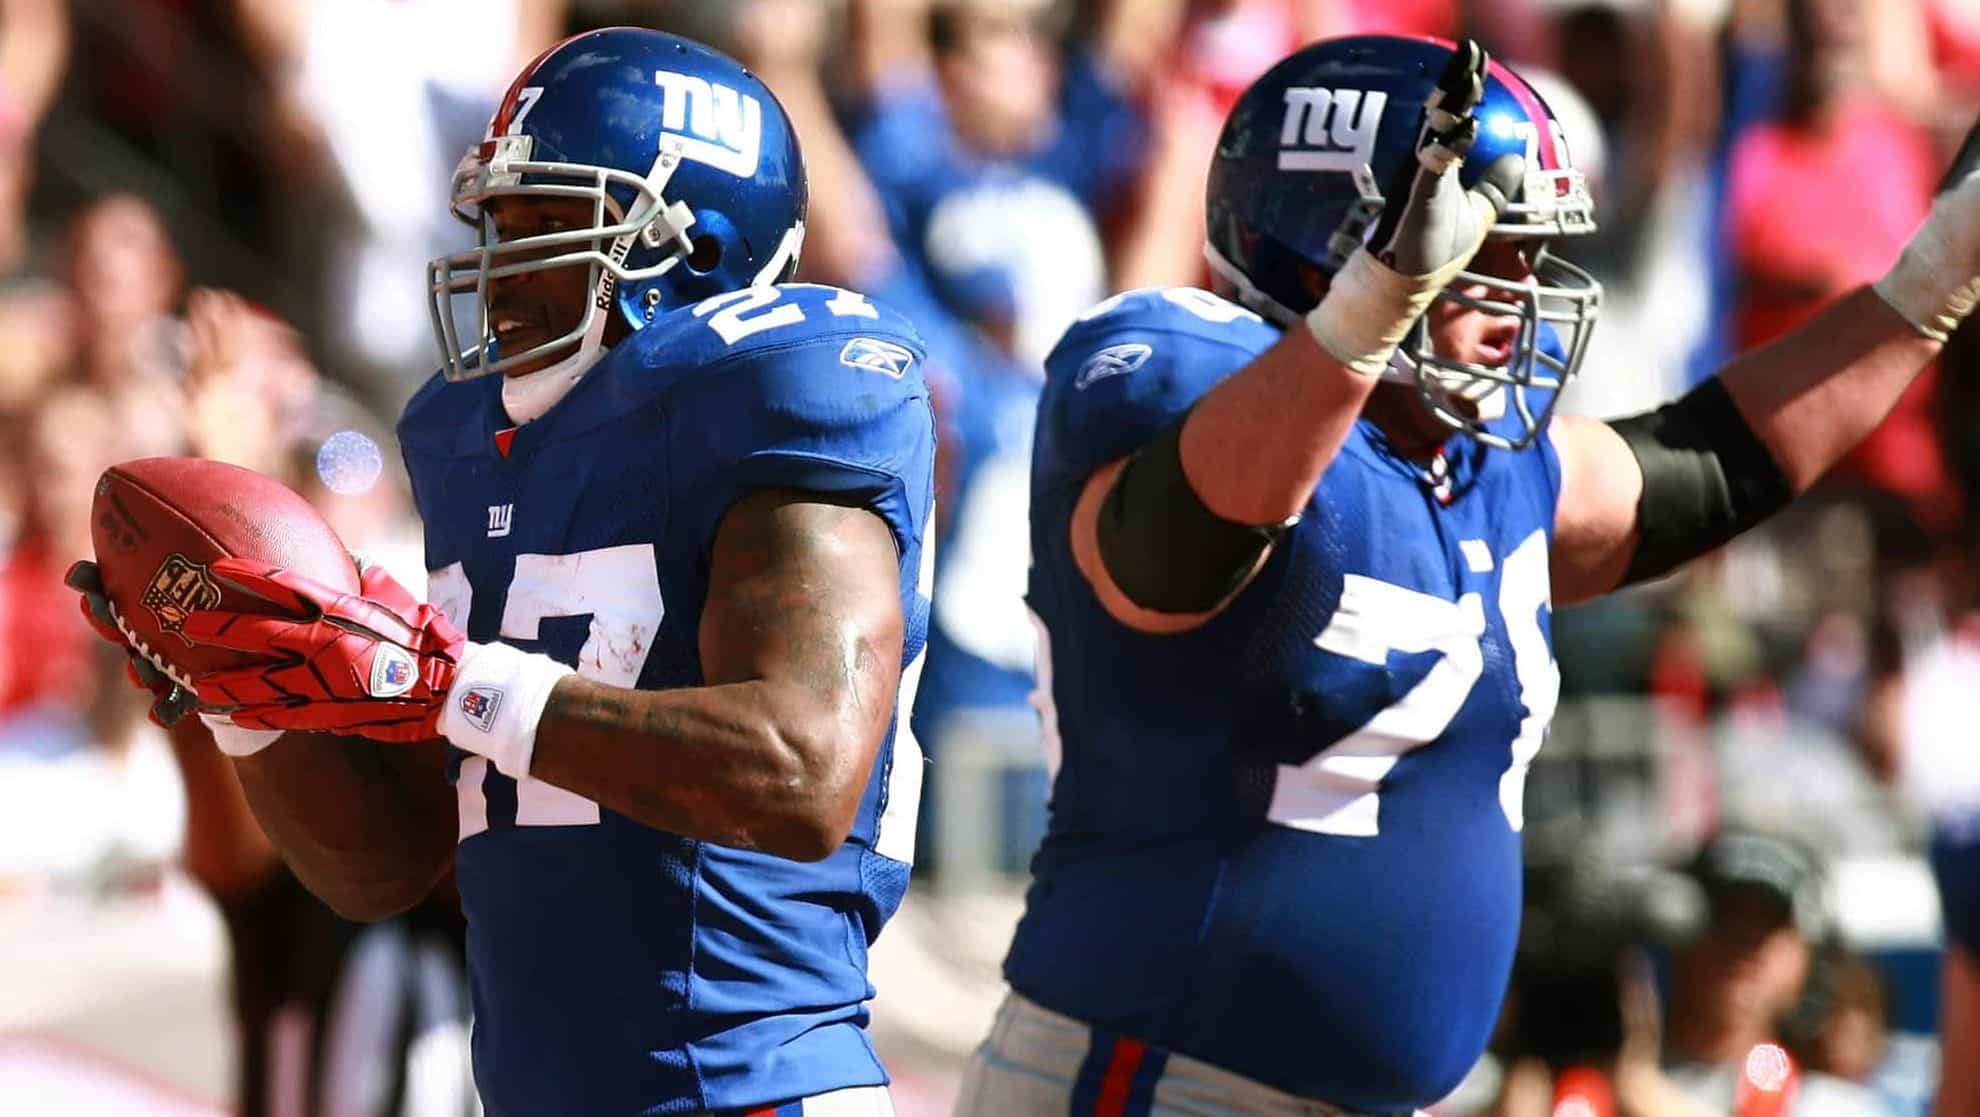 New York Giants: Ranking Big Blue's impact players over past decade